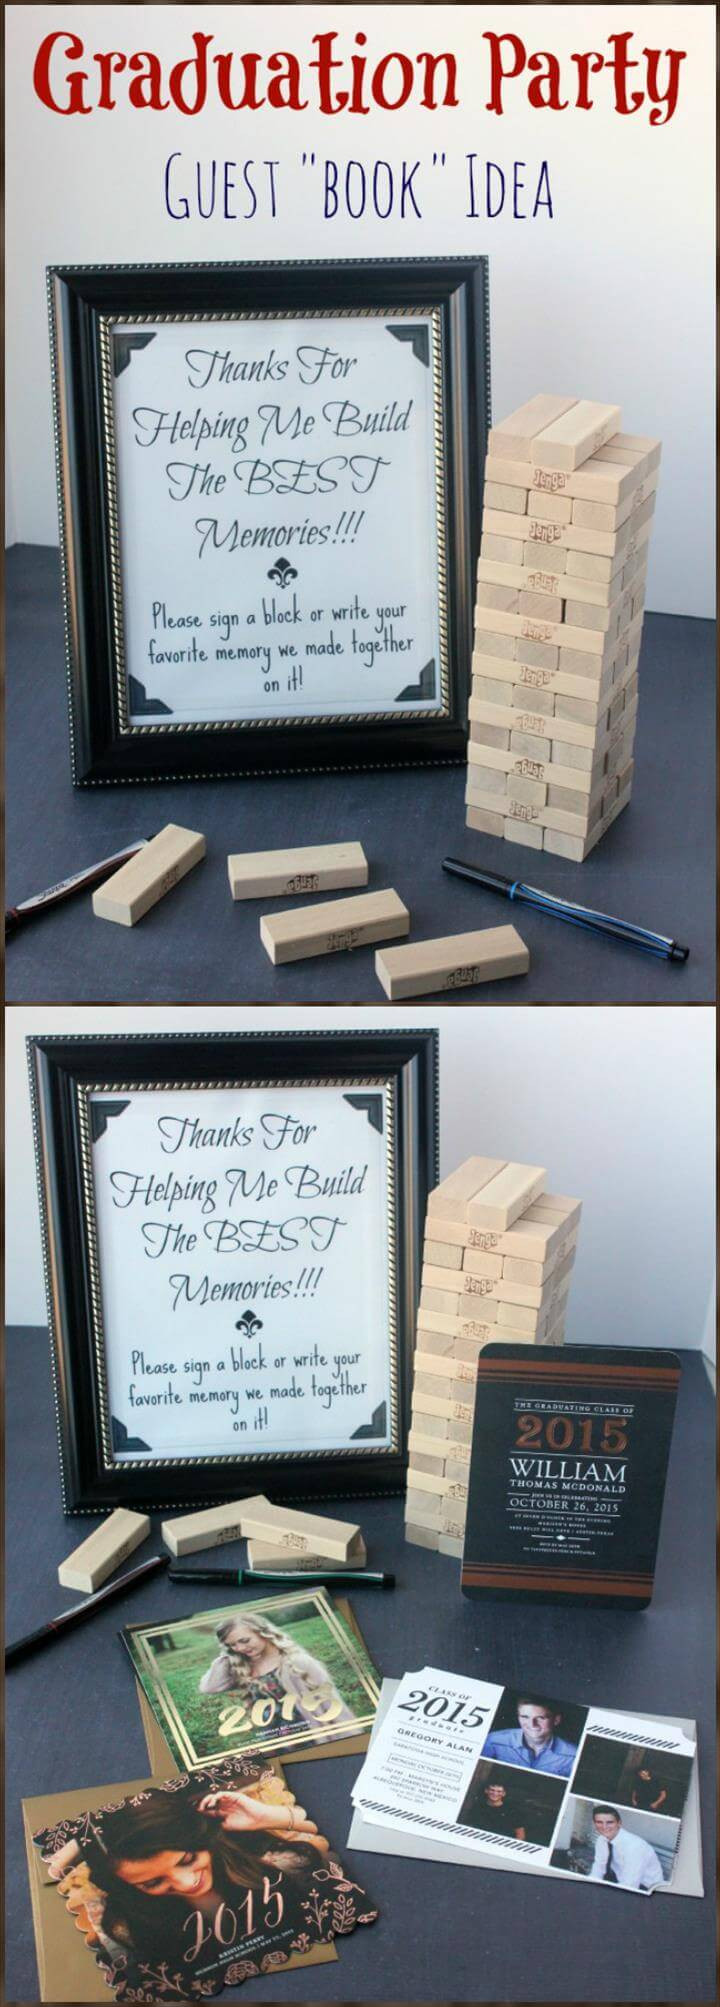 Graduation Party Signing Ideas
 50 DIY Graduation Party Ideas & Decorations Page 3 of 4